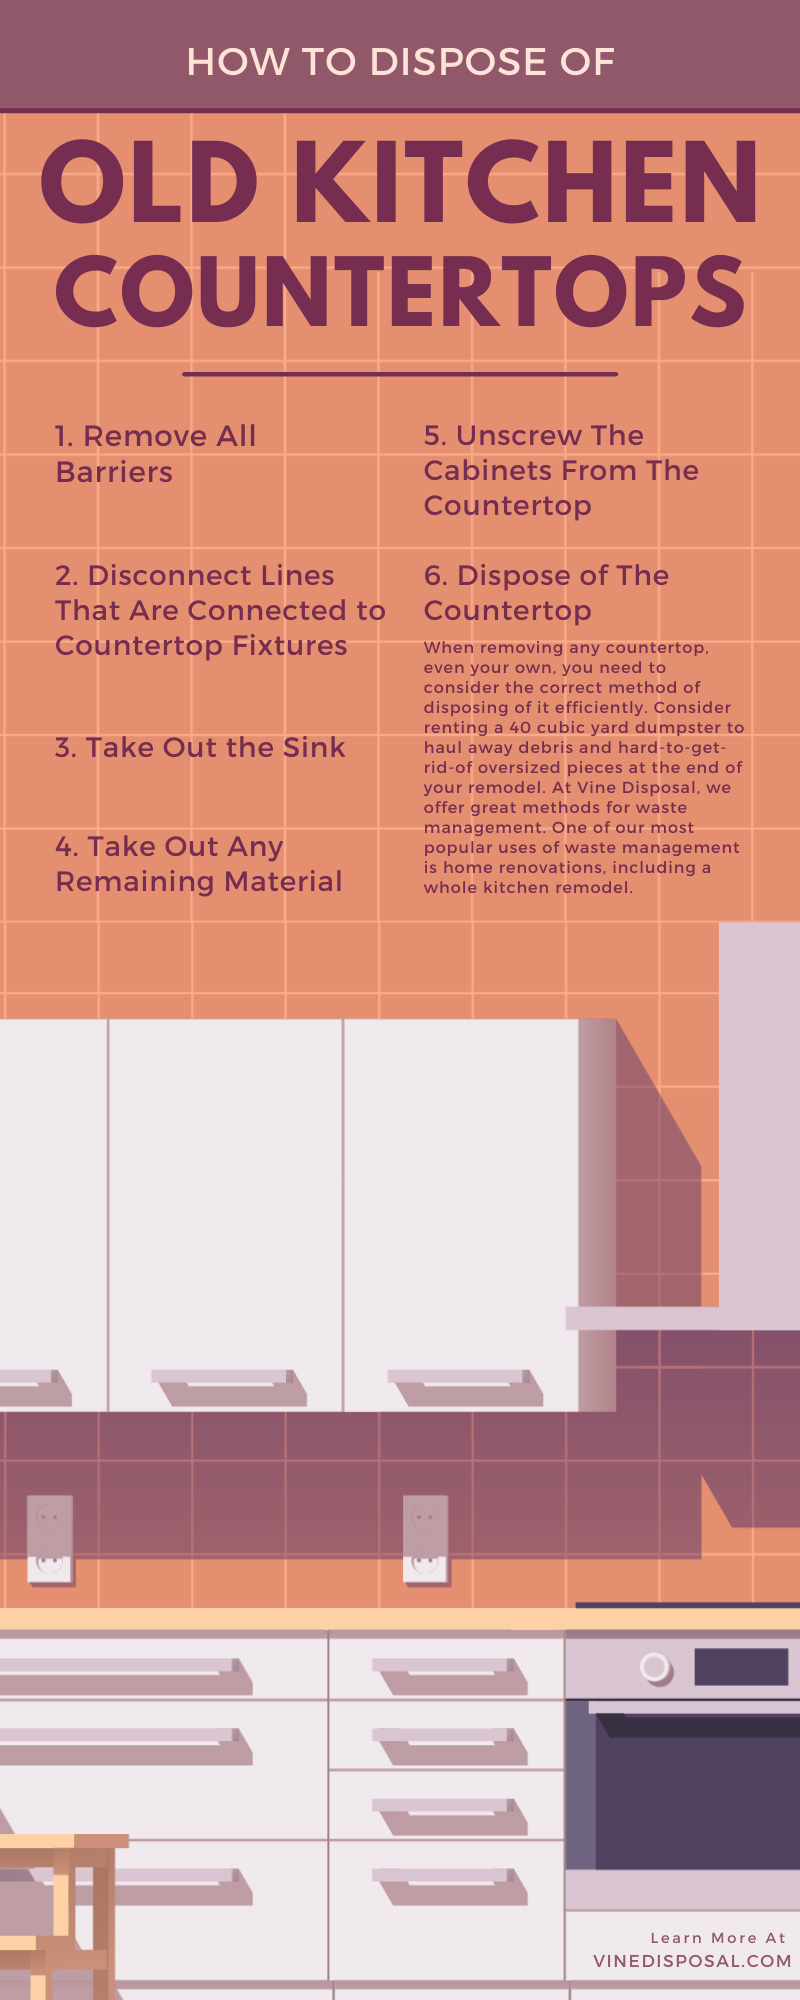 How To Dispose of Old Kitchen Countertops